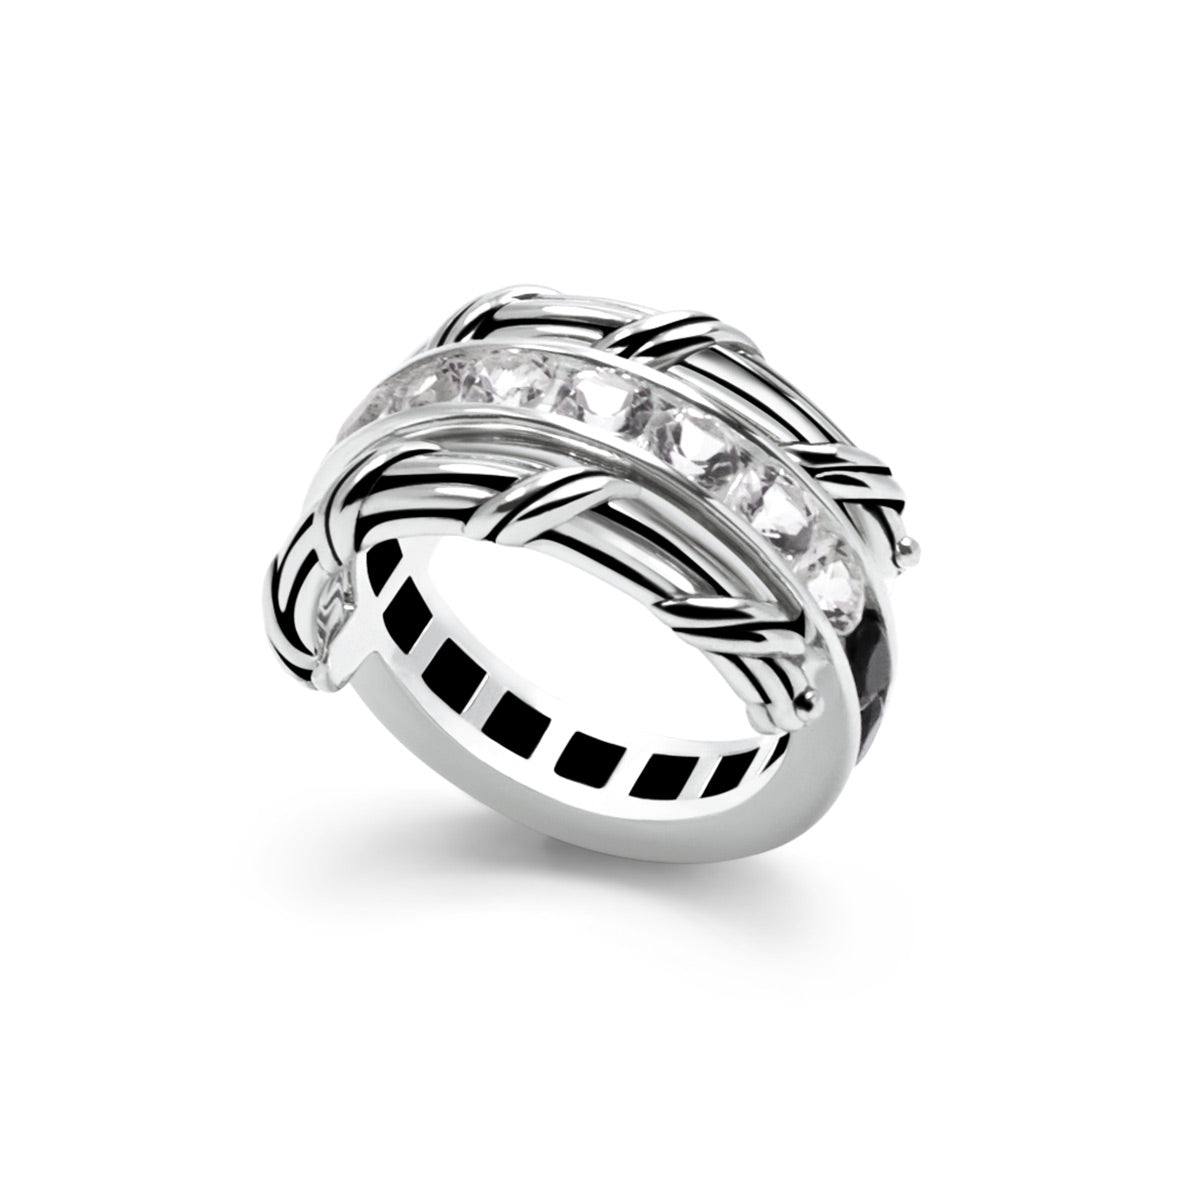 Signature Classic Reversible Ring with white topaz and black spinel in sterling silver